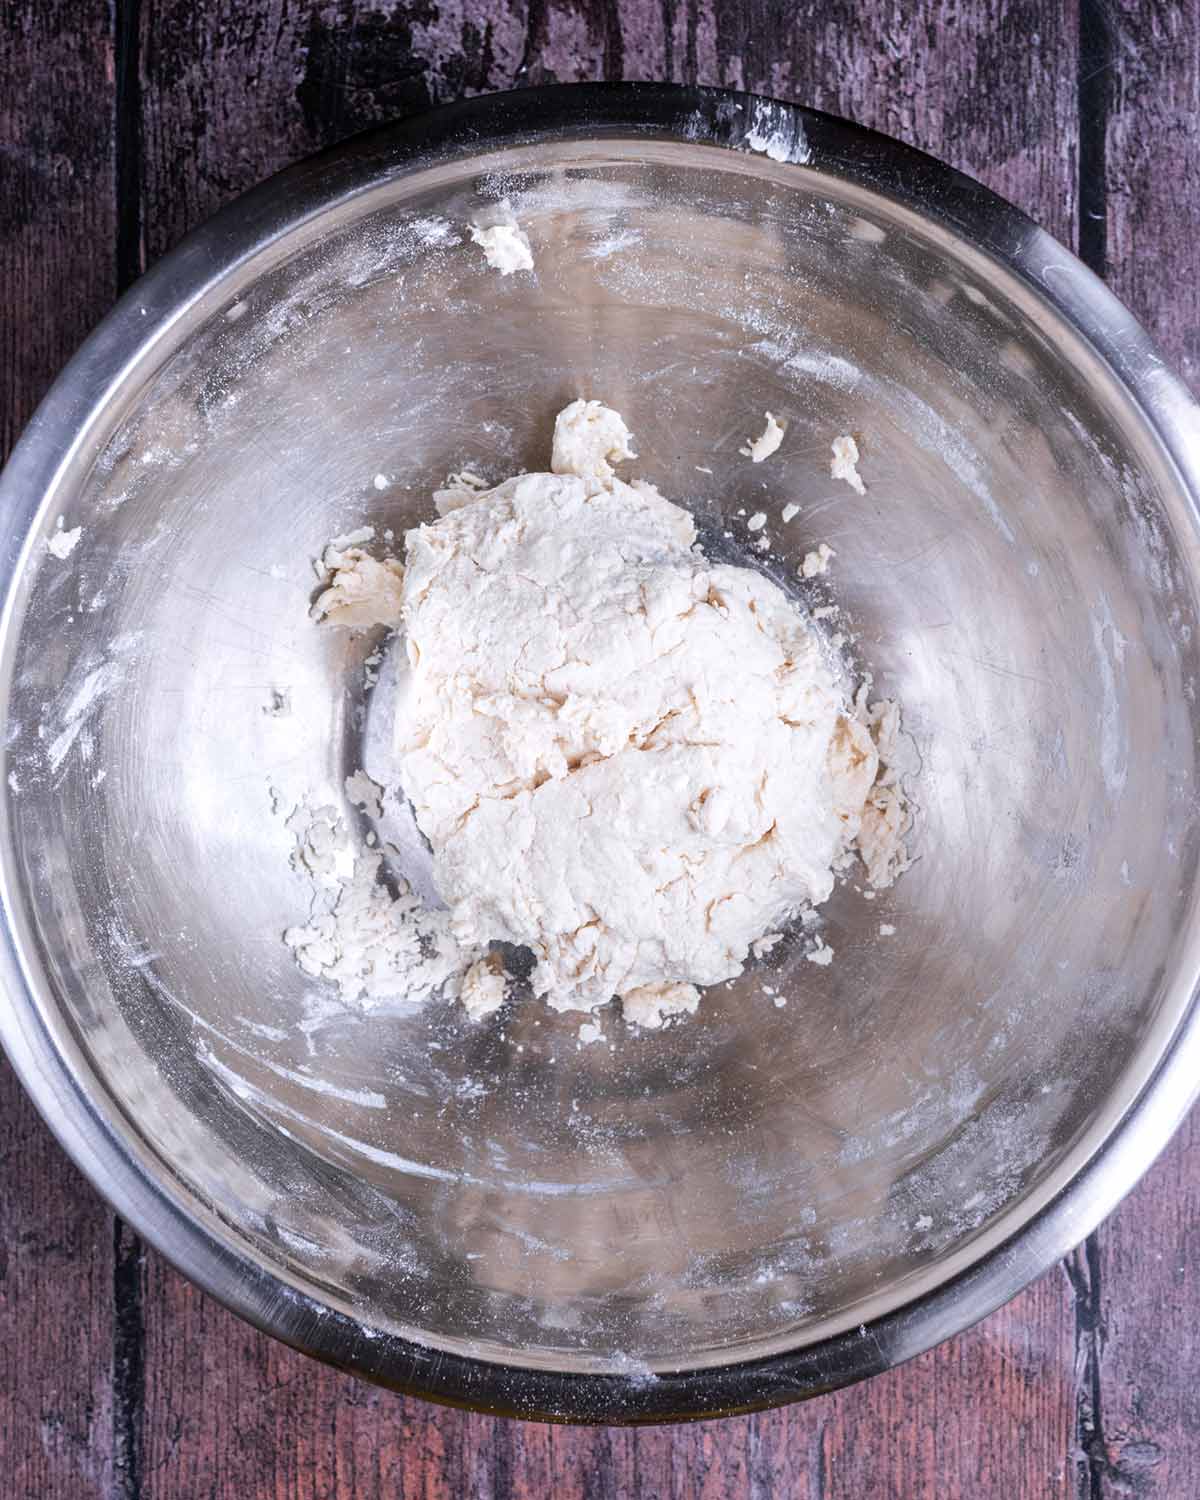 A ball of dough in the mixing bowl.